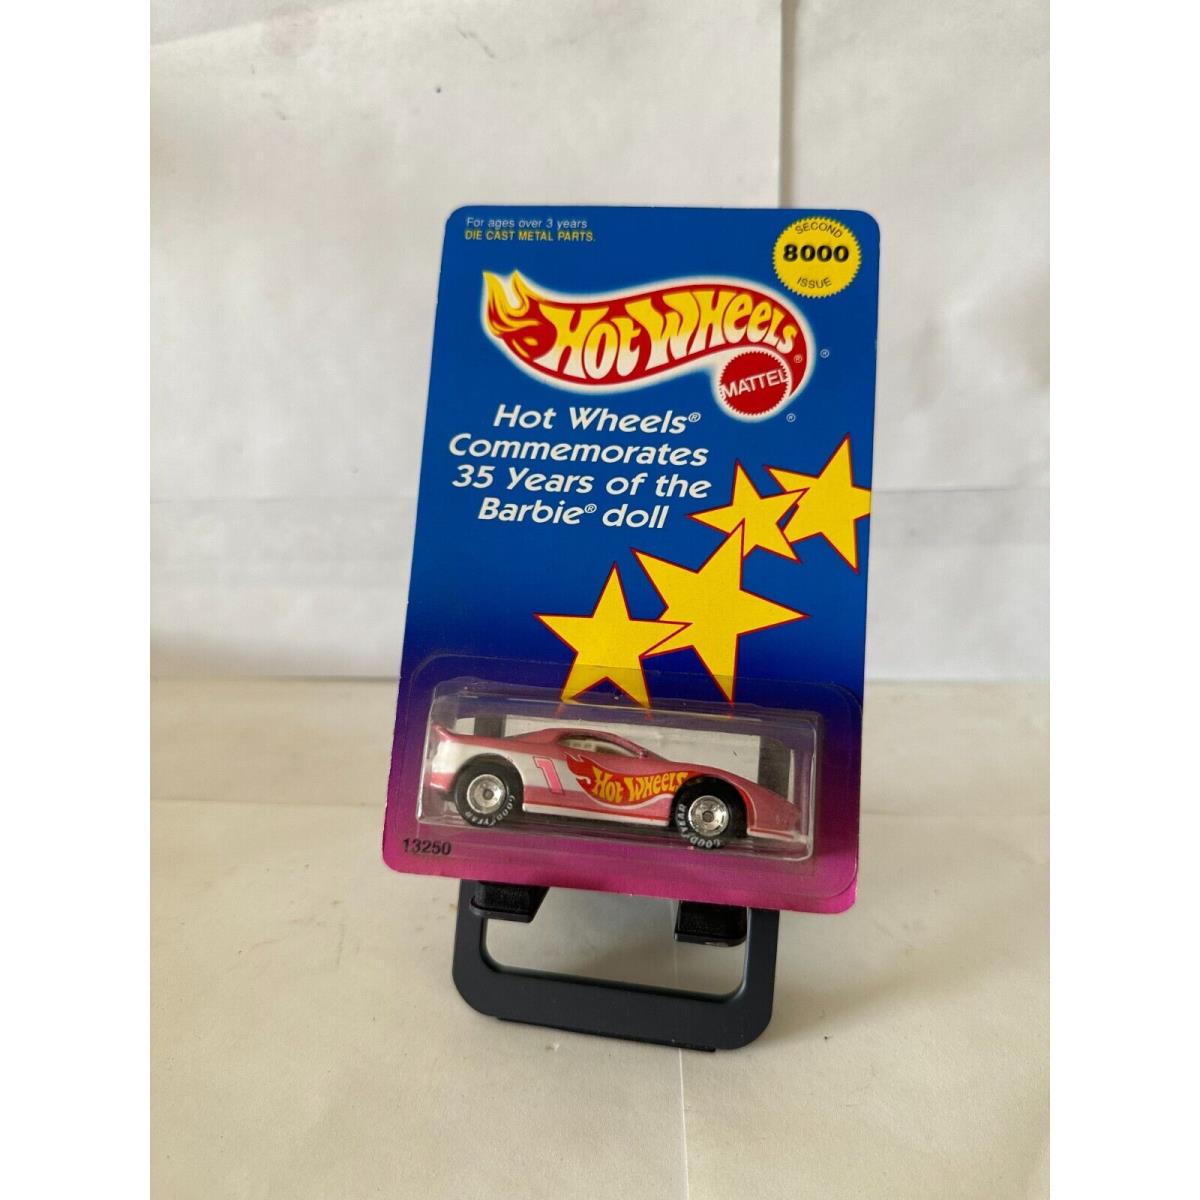 Hot Wheels Commemorates 35 Years of The Barbie Doll 8000 Second Issue P71